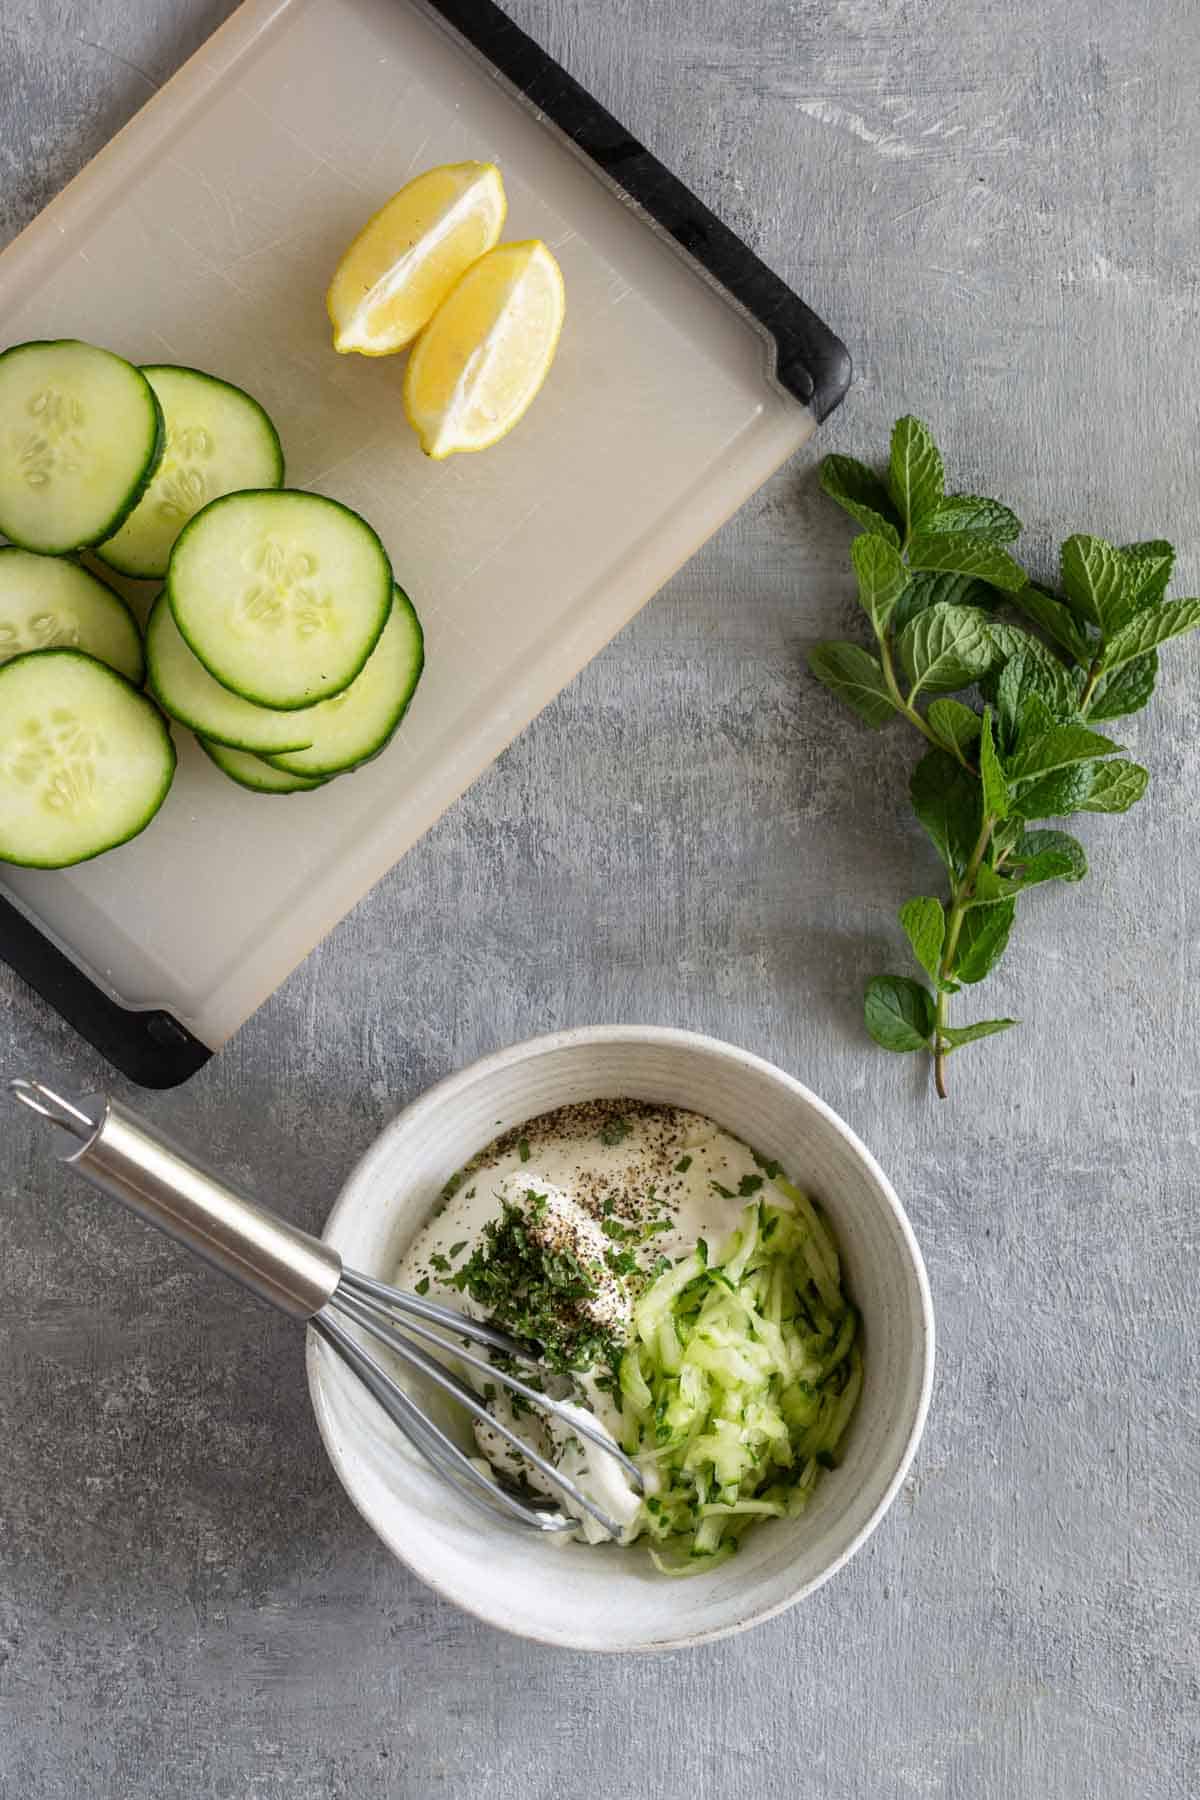 A cutting board with sliced cucumbers and lemon wedges is next to a bowl containing yogurt, chopped cucumber, and herbs, beside a whisk and fresh mint leaves on a gray surface.